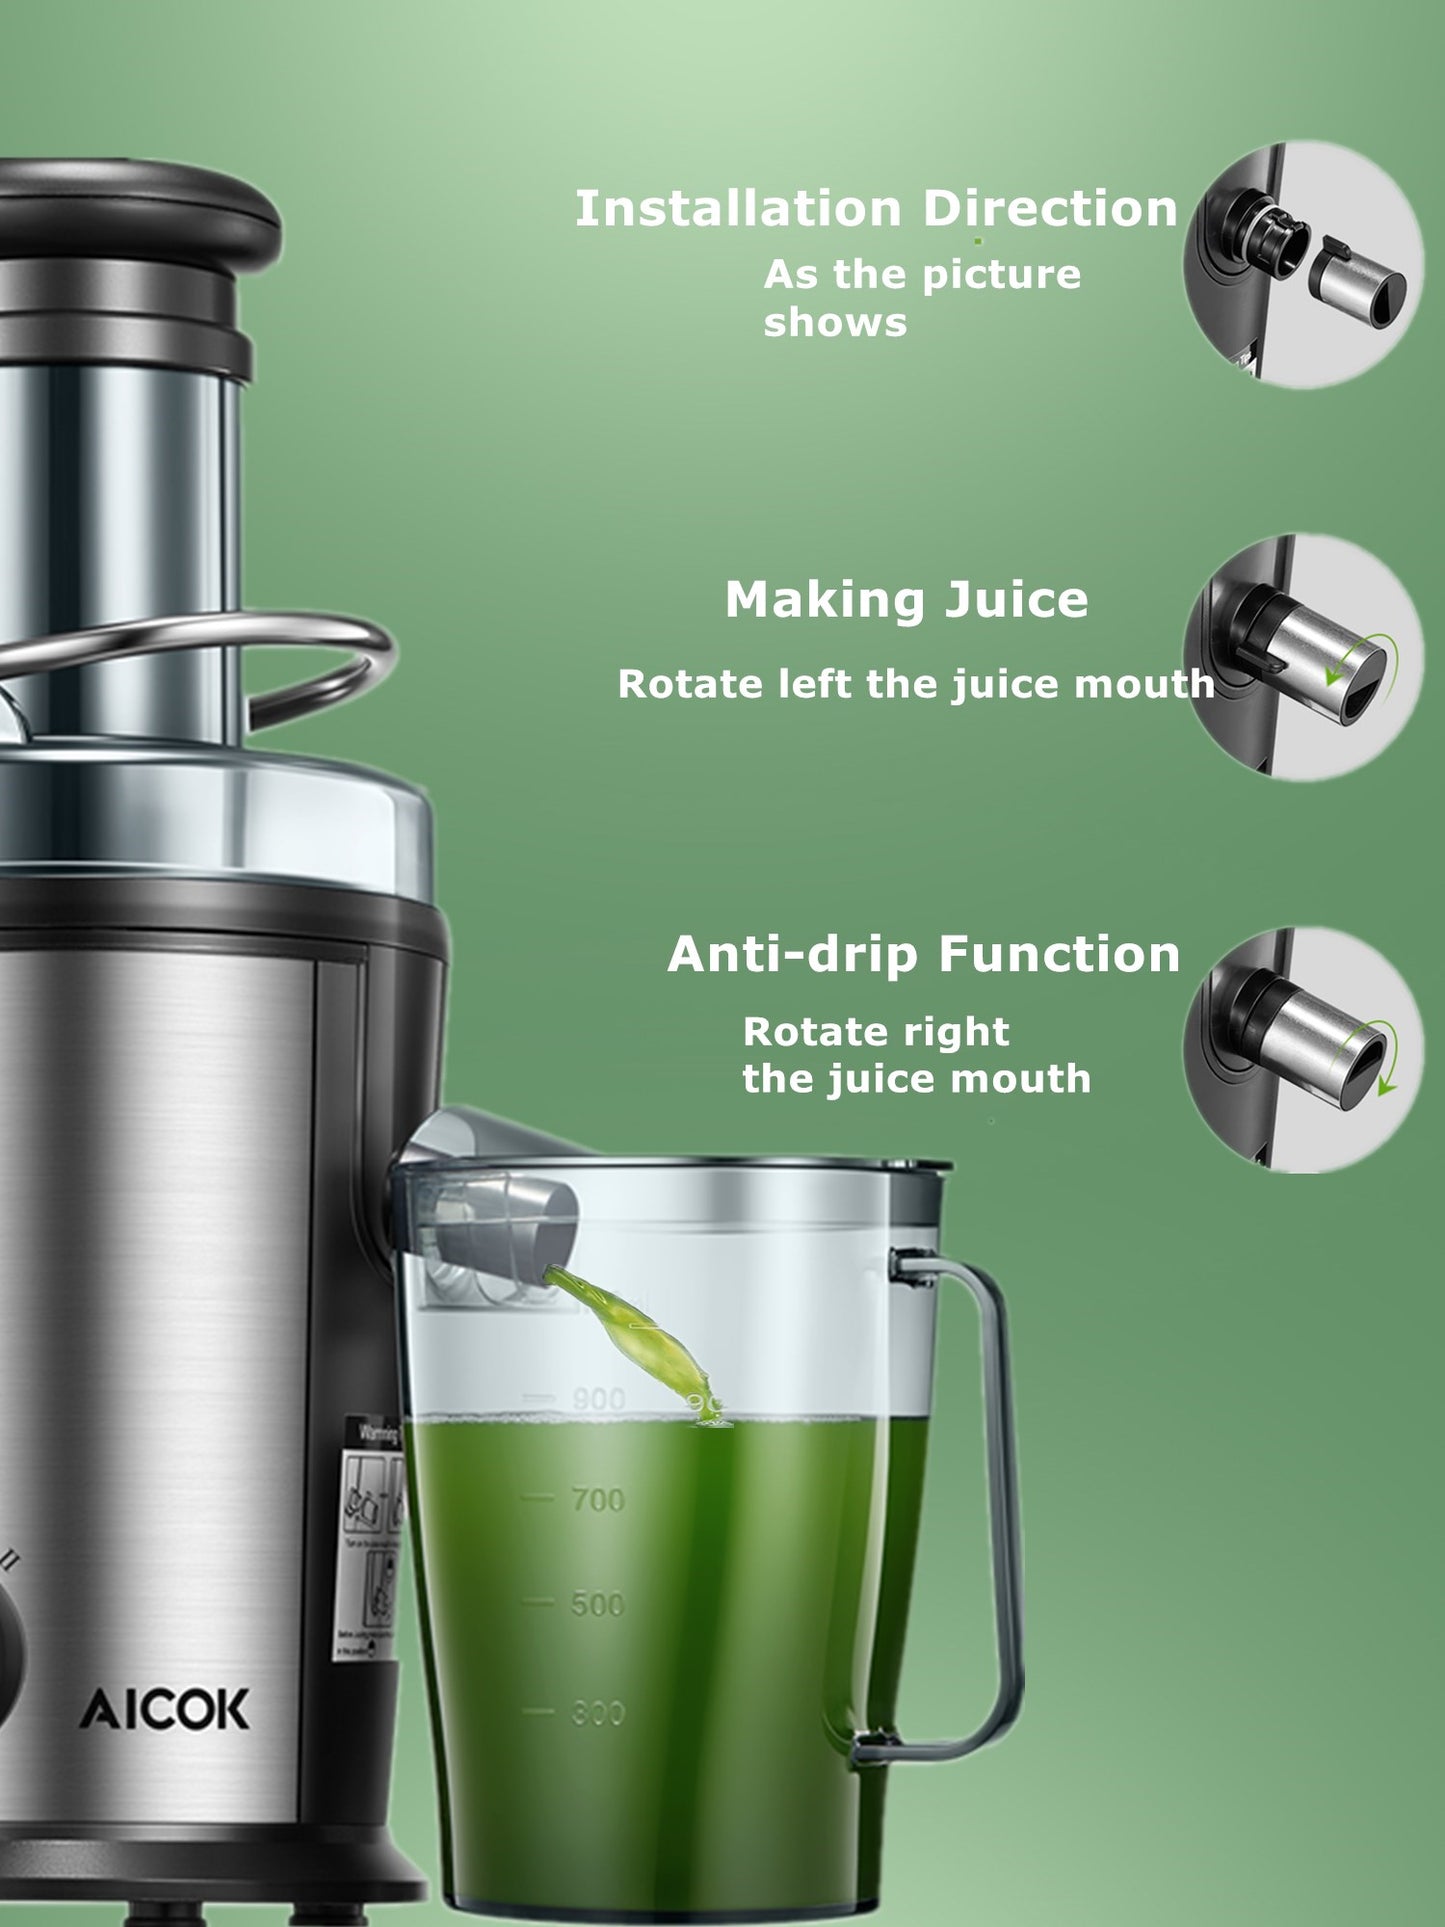 Products AICOK Juice Extractor Easy to Clean, 800W Ultra Power Stainless Steel Centrifugal Juicer Machine with 3''Wide Mouth for Whole Fruits & Vegetables, 2 Speed Control, Anti-drip, BPA Free